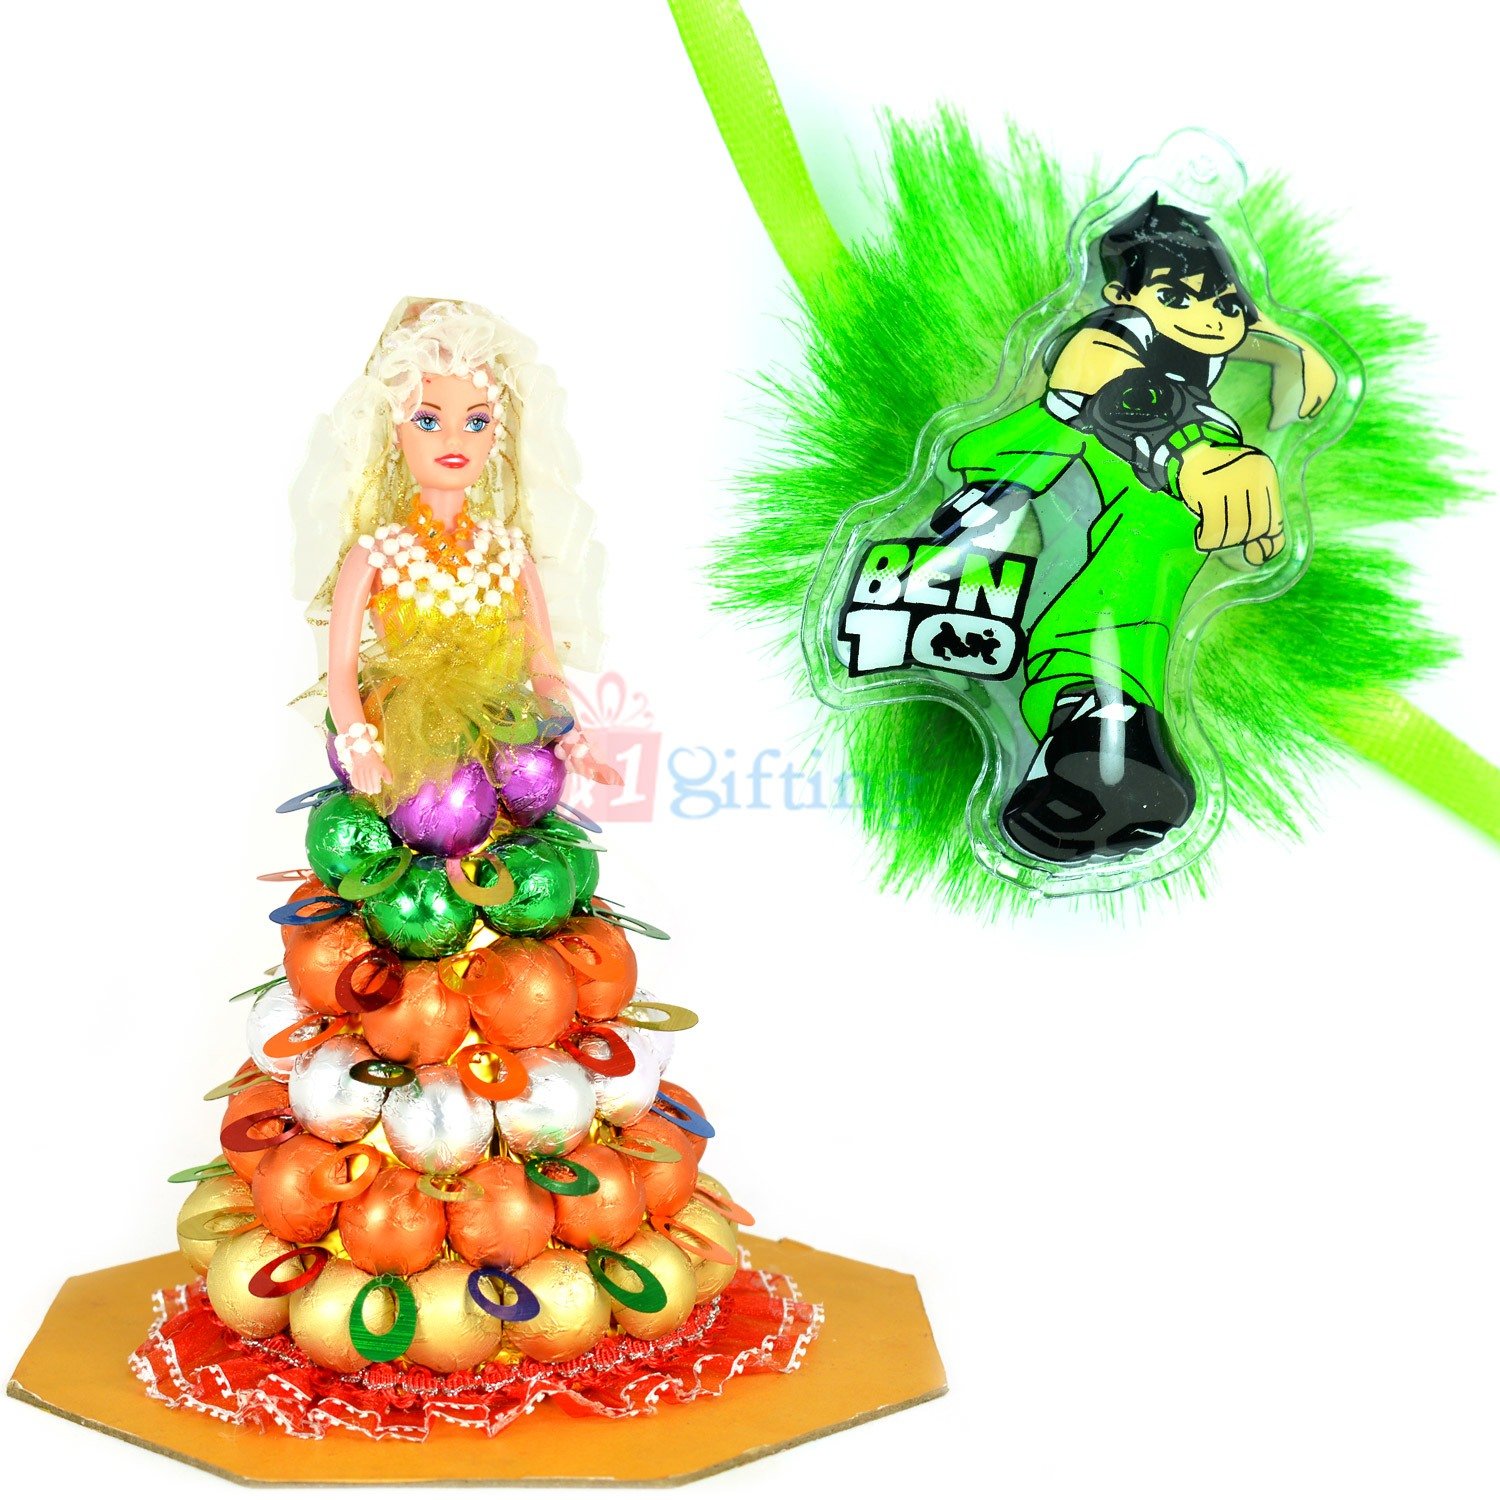 Chocolate Barbie Doll with Ben10 Rakhi for Kids